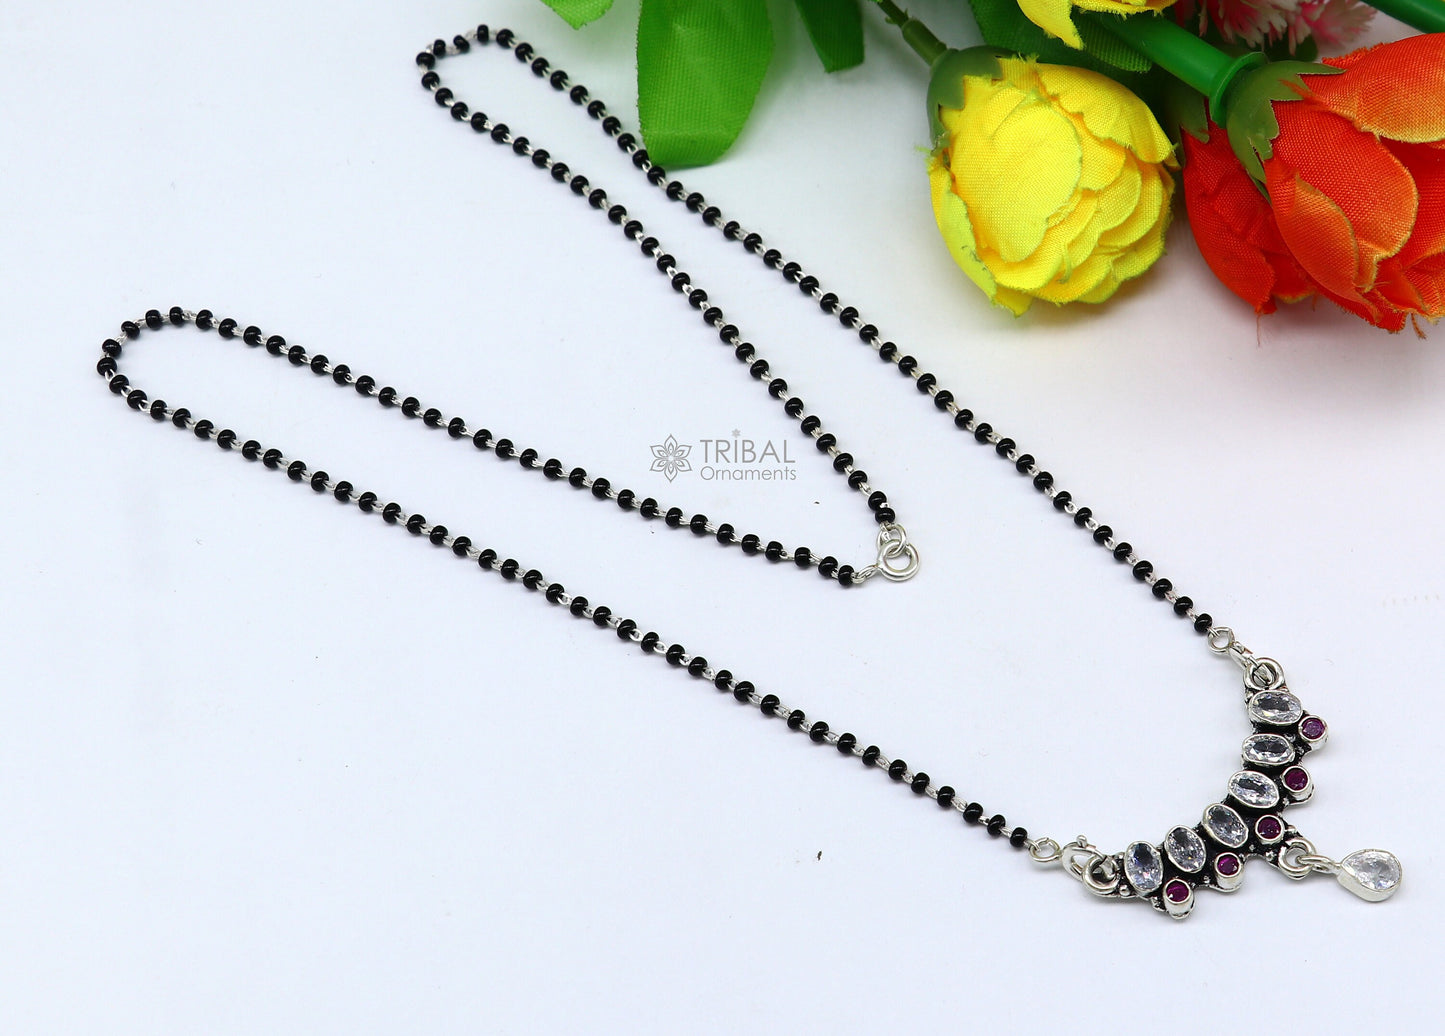 925 sterling silver black beads and cut stone mangal sutra necklace for Every Occasion brides Mangalsutra chunky necklace ms41 - TRIBAL ORNAMENTS